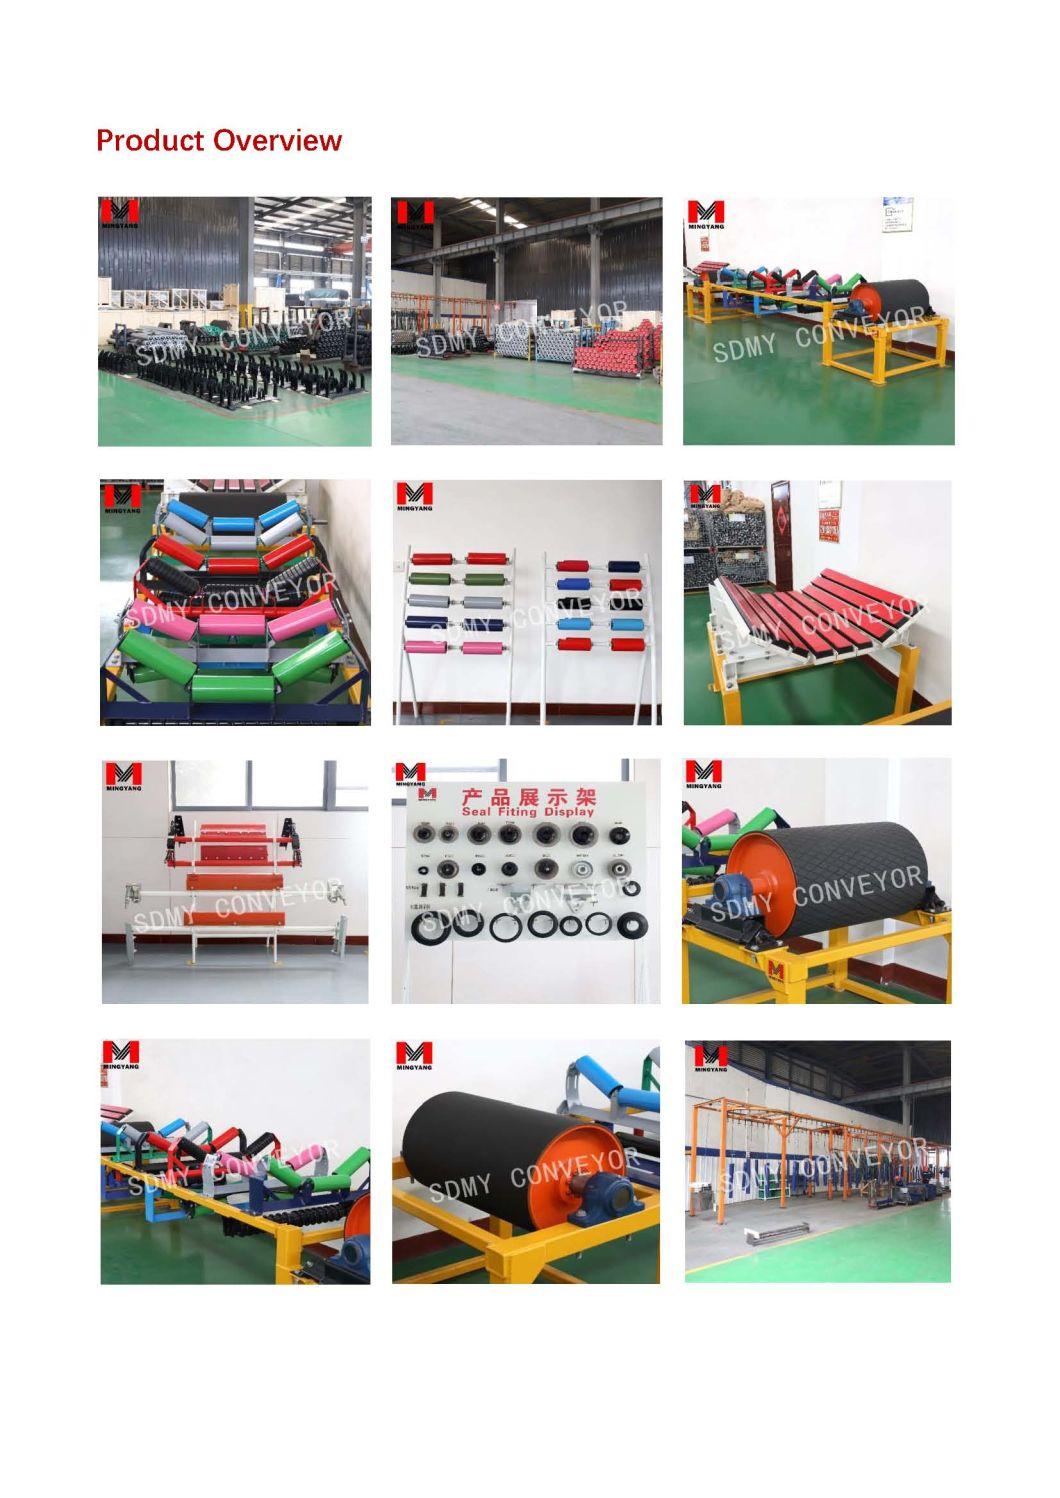 HDPE Roller in New Condition for Conveyor Belt Use